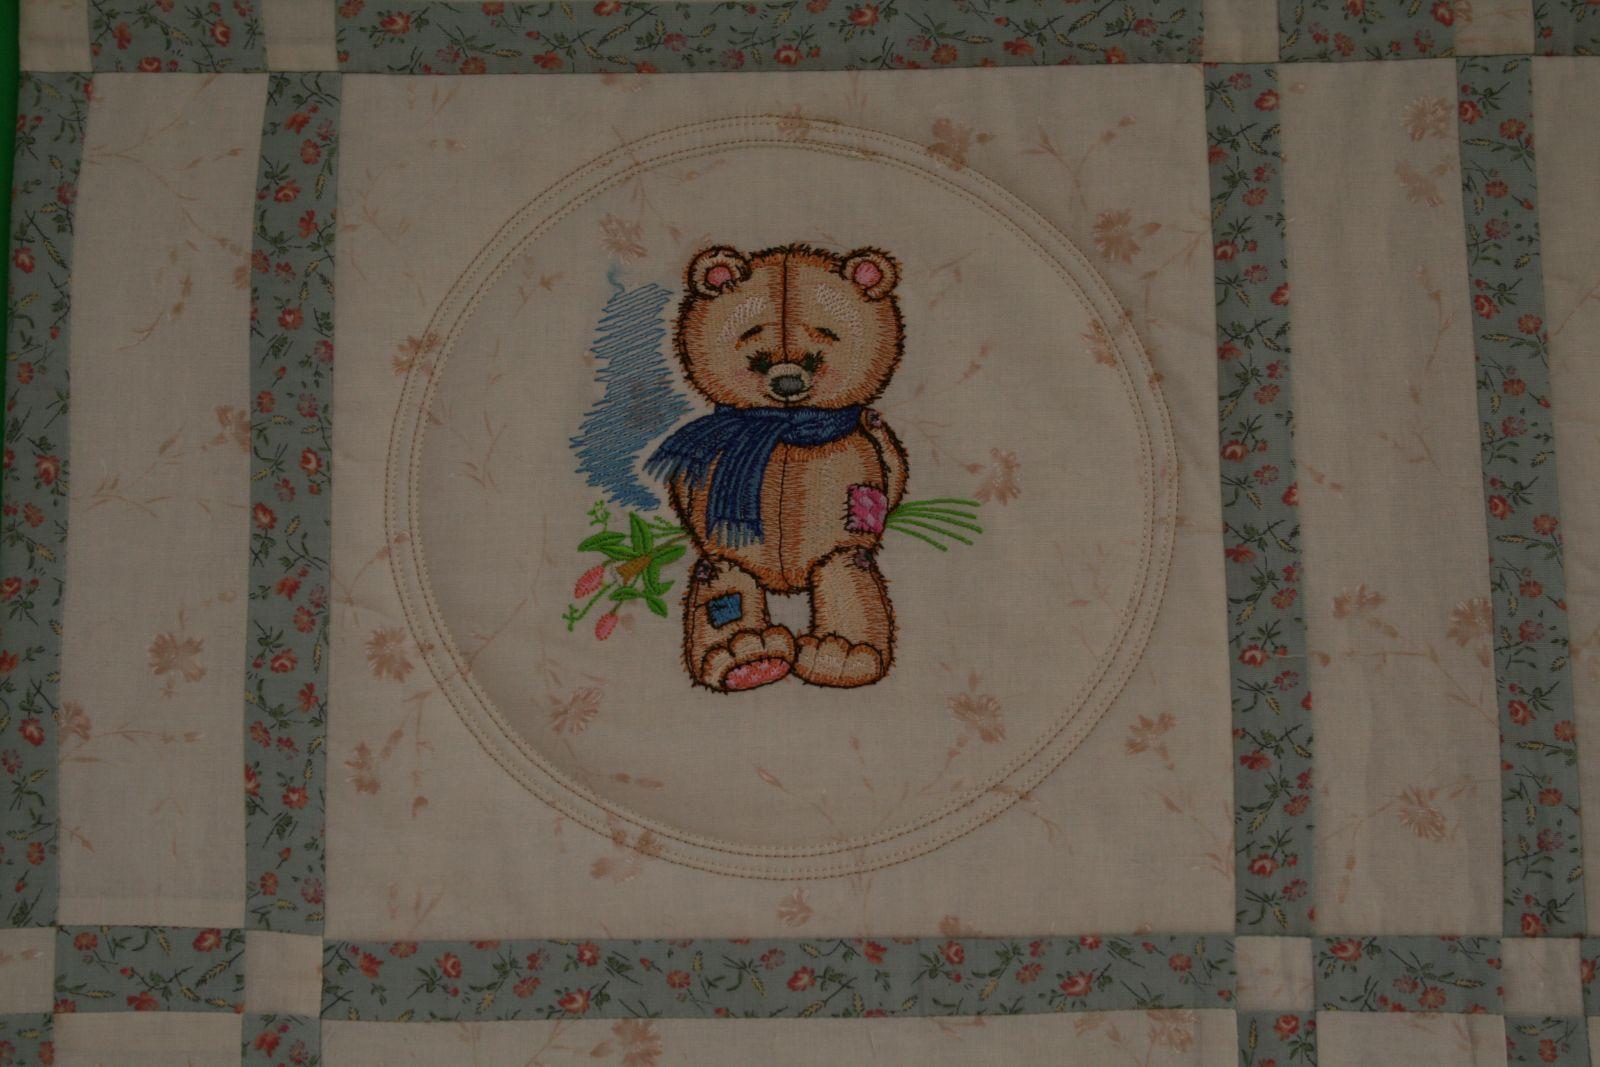 Old toys embroidered in quilt